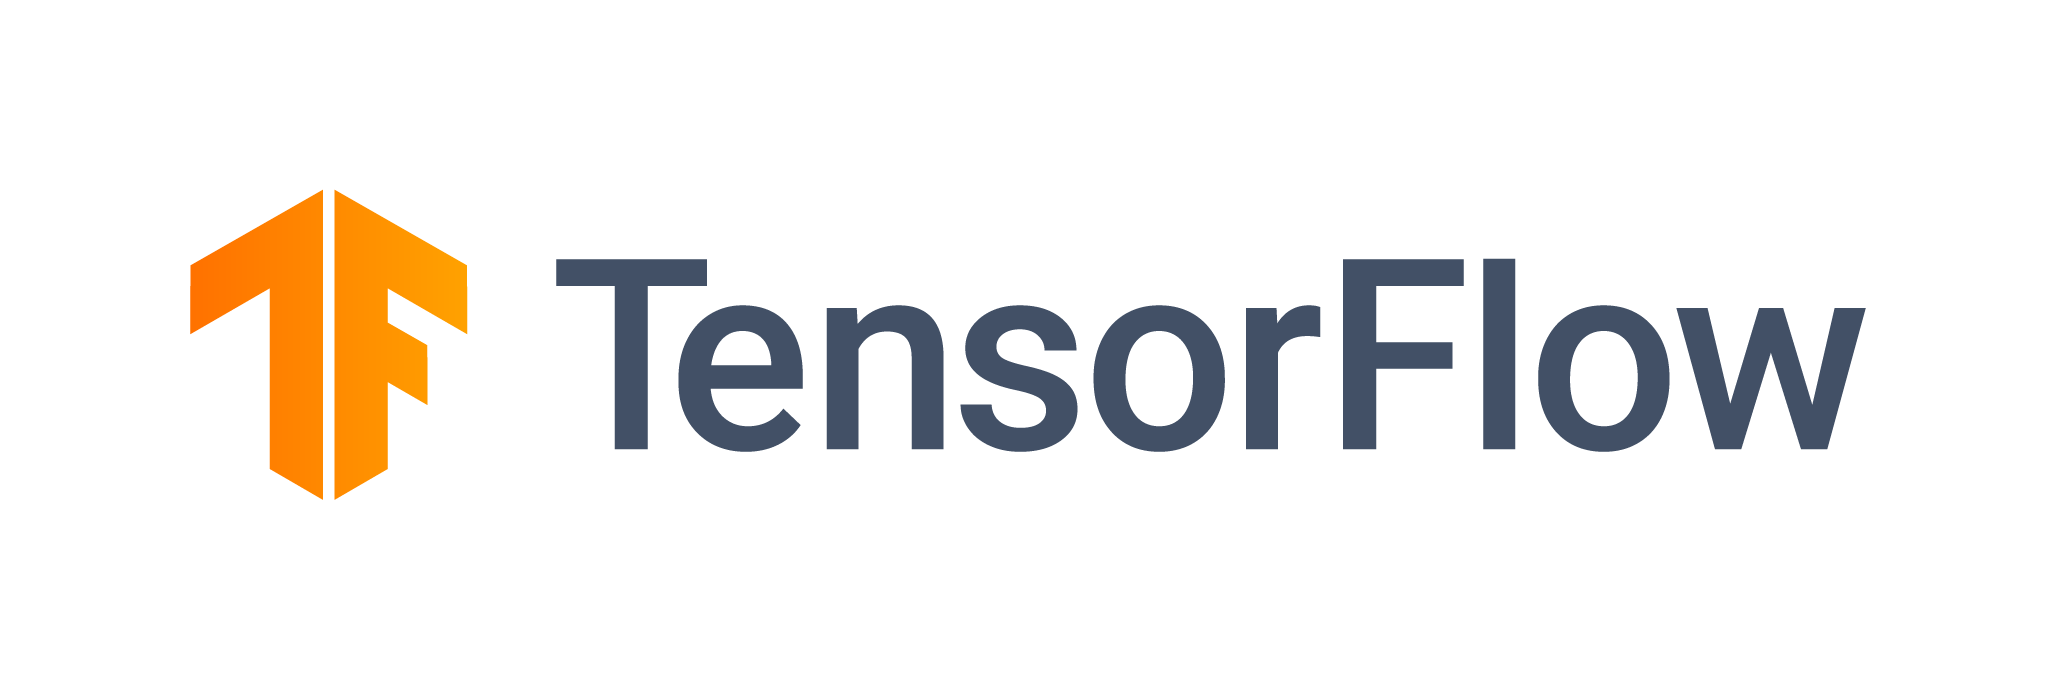 Build tensorflow2 with CUDA support